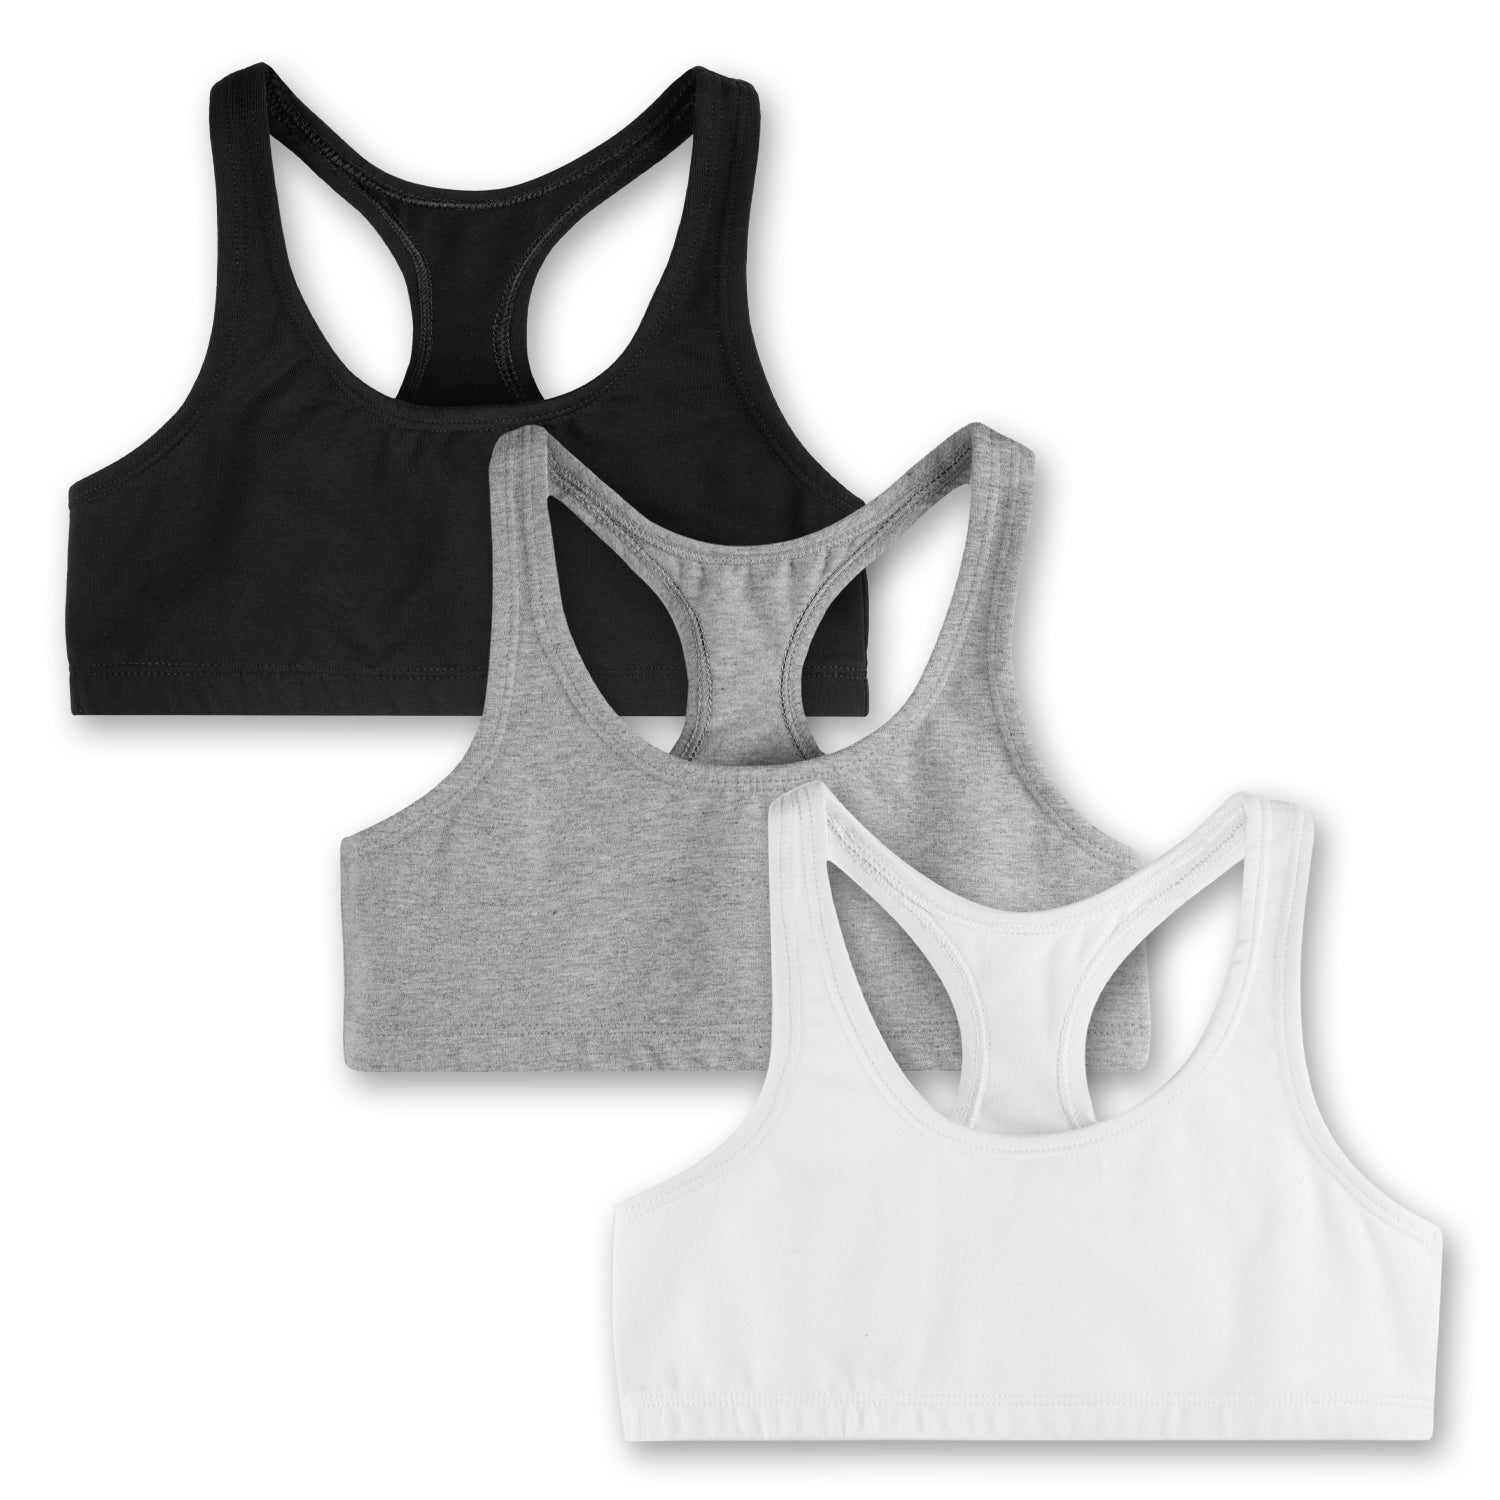  INNERSY Girls Sports Bras Comfortable Cotton Little Girls  Training Bras 3 Pack (Small, Black+Grey+White),Little kid: Clothing, Shoes  & Jewelry